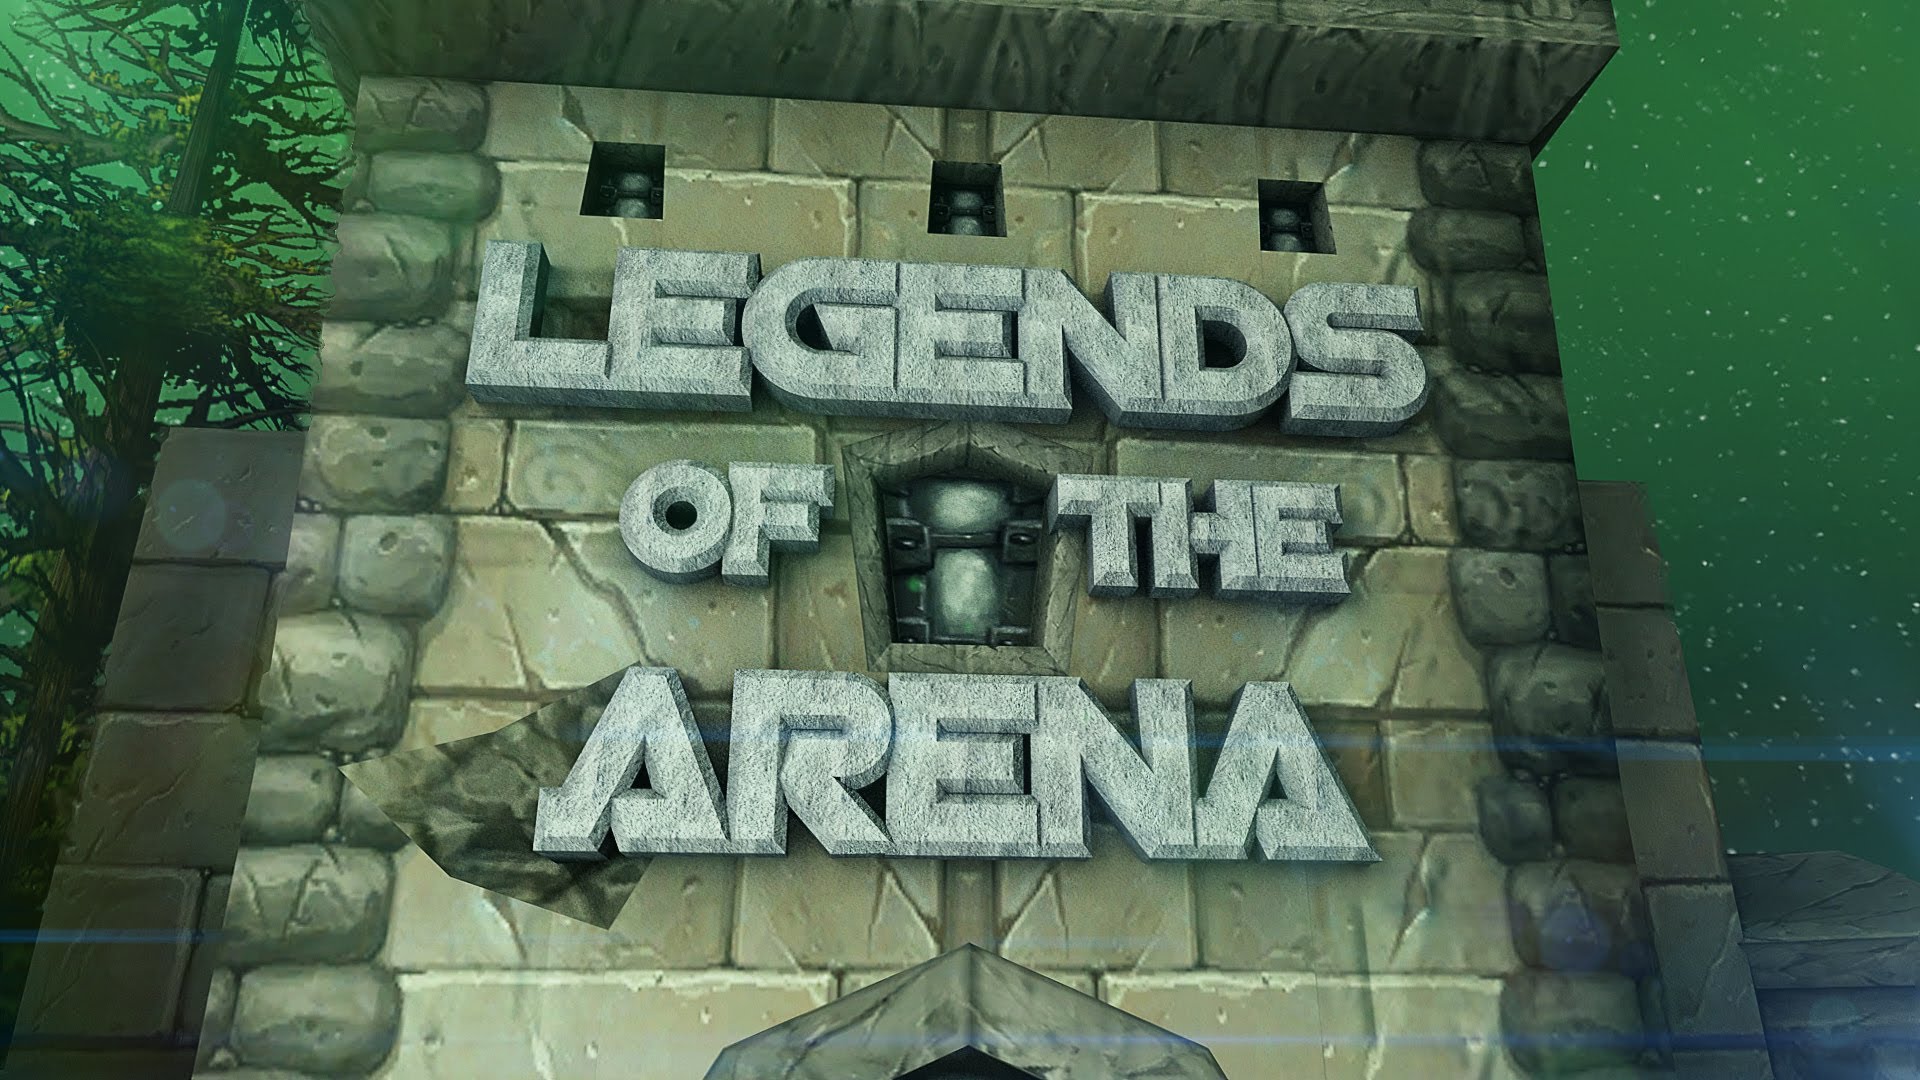 Swifty's Legends of the Arena 2013 Montage by Psynaps